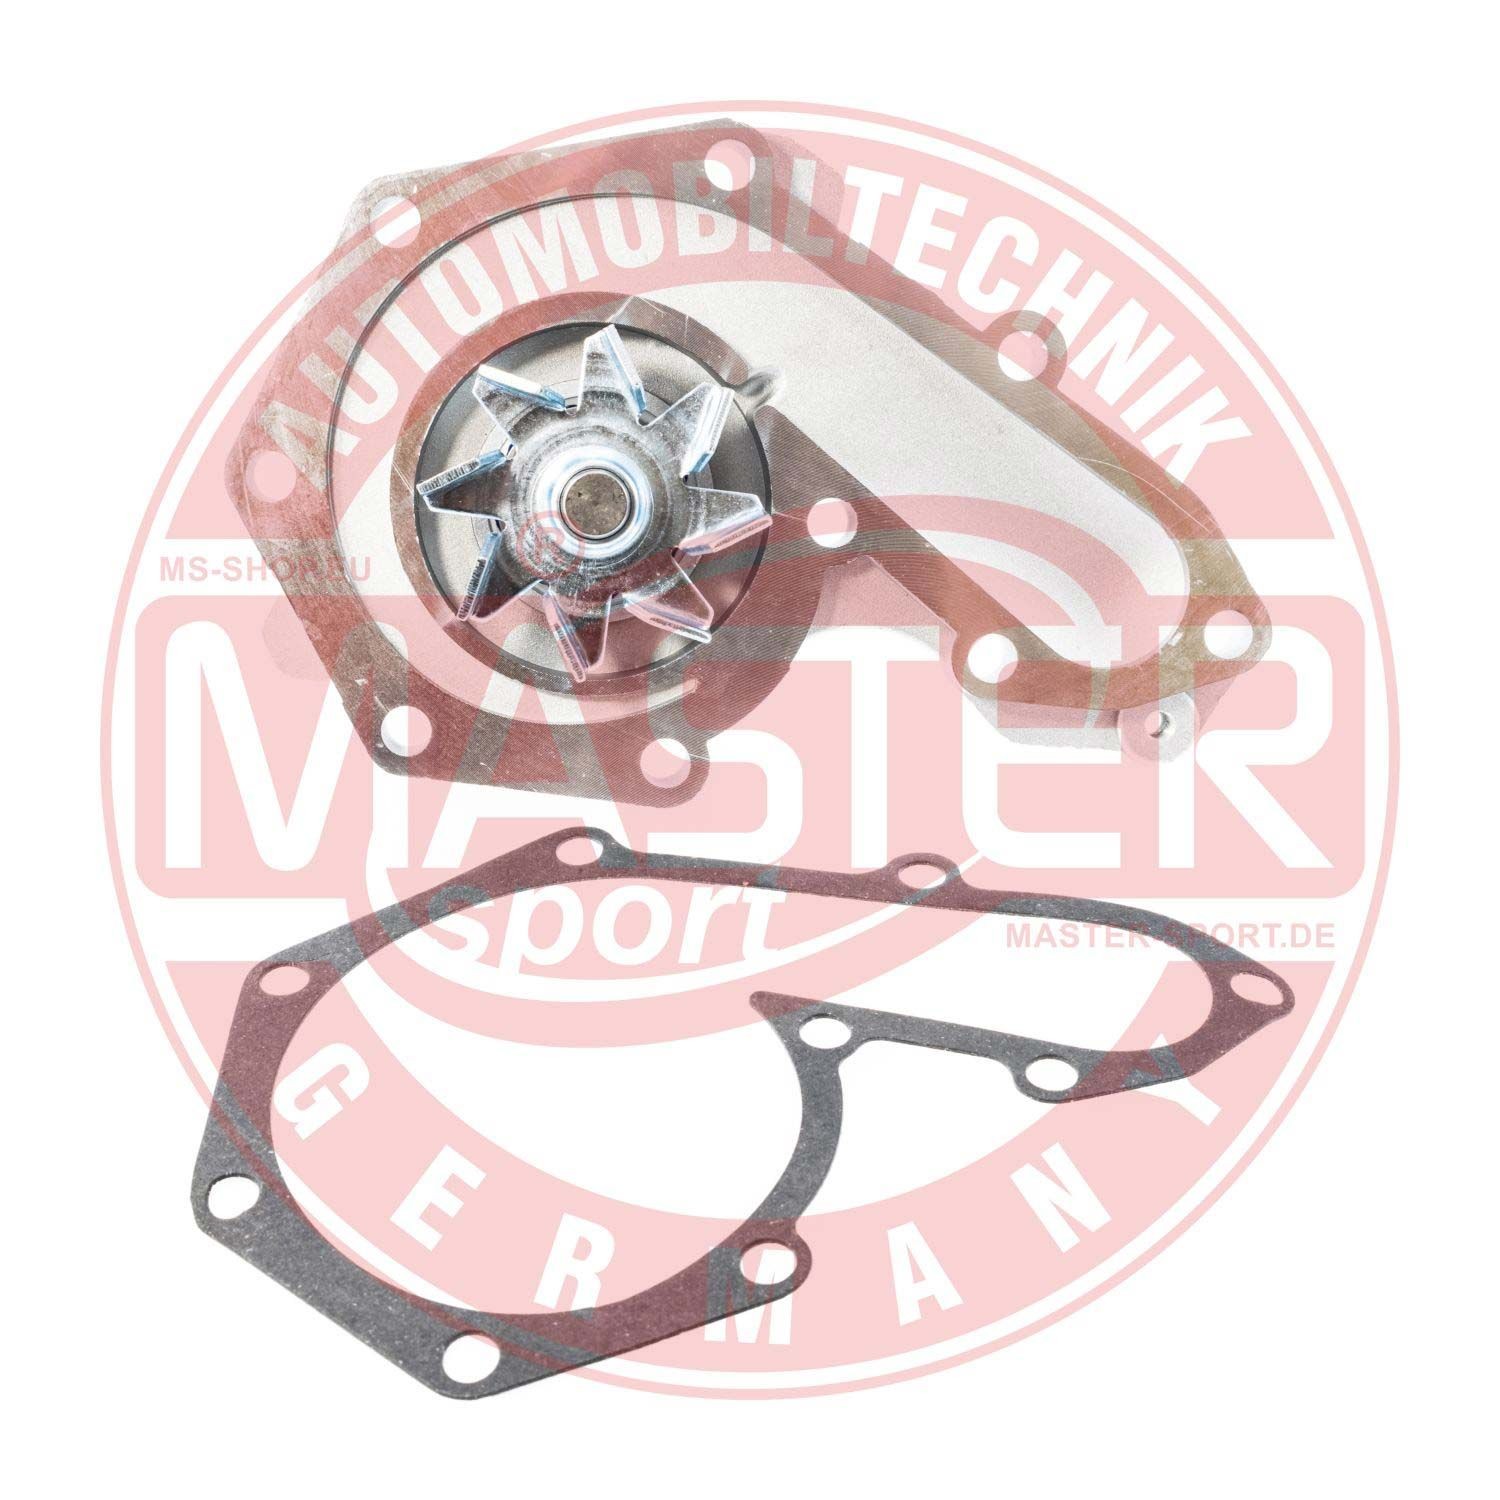 MASTER-SPORT Water pump for engine 054-WP-PCS-MS